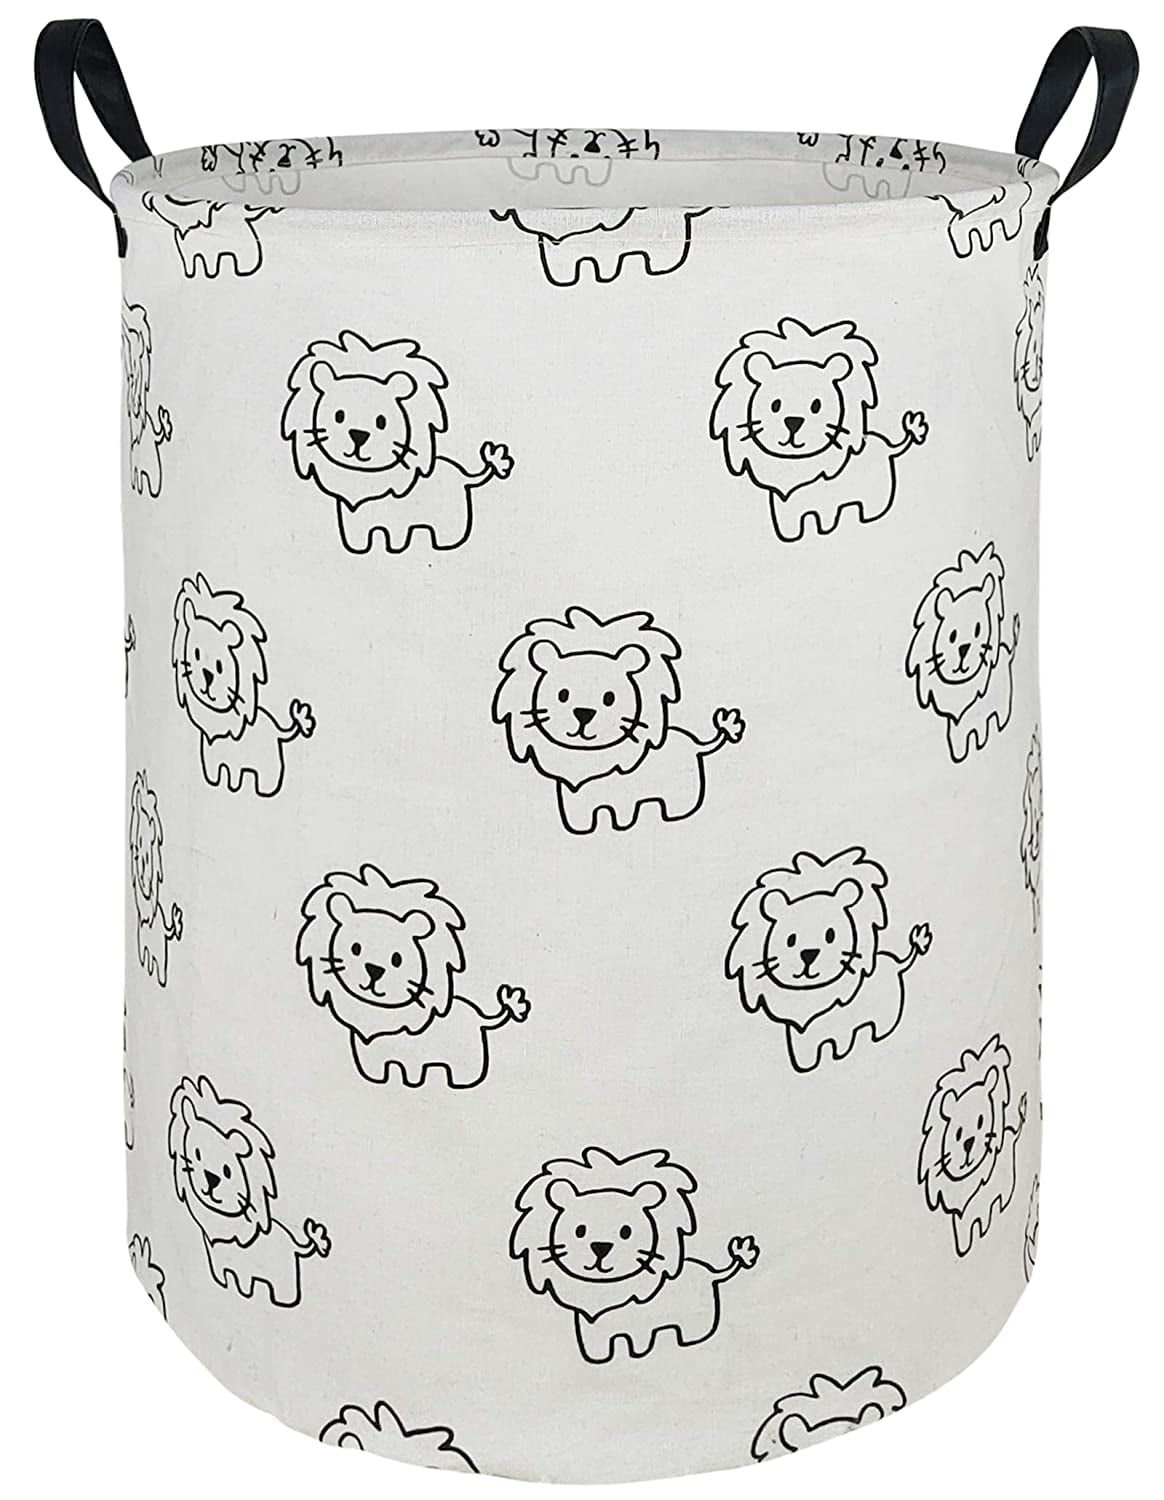 Bedroom Clothes,Baby Nursery Sunflower LANGYASHAN Storage Bin Canvas Fabric Collapsible Organizer Basket for Laundry Hamper,Toy Bins,Gift Baskets 